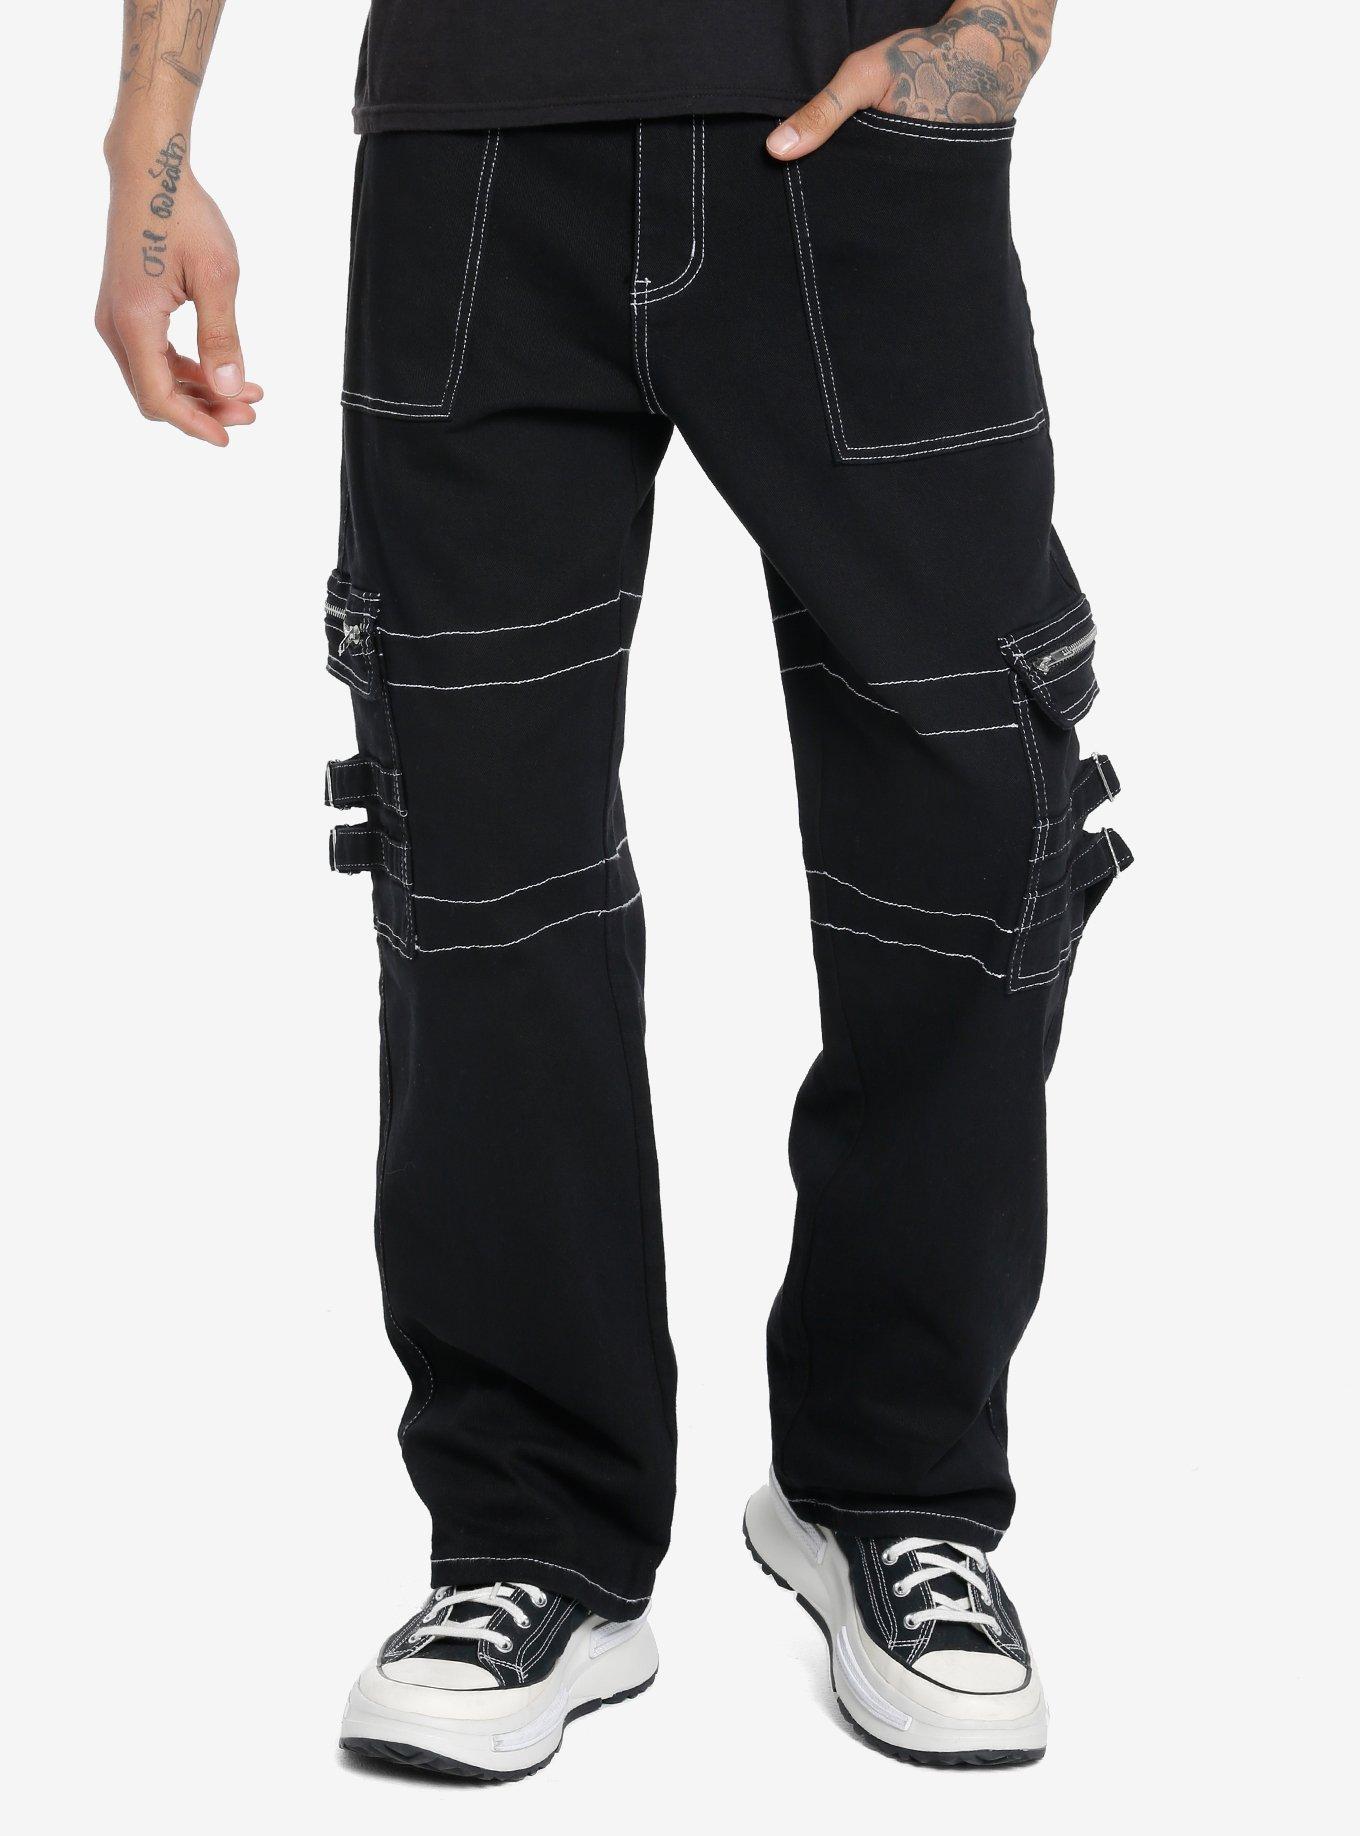 Black & White Contrast Stitch Cargo Pants | Hot Topic